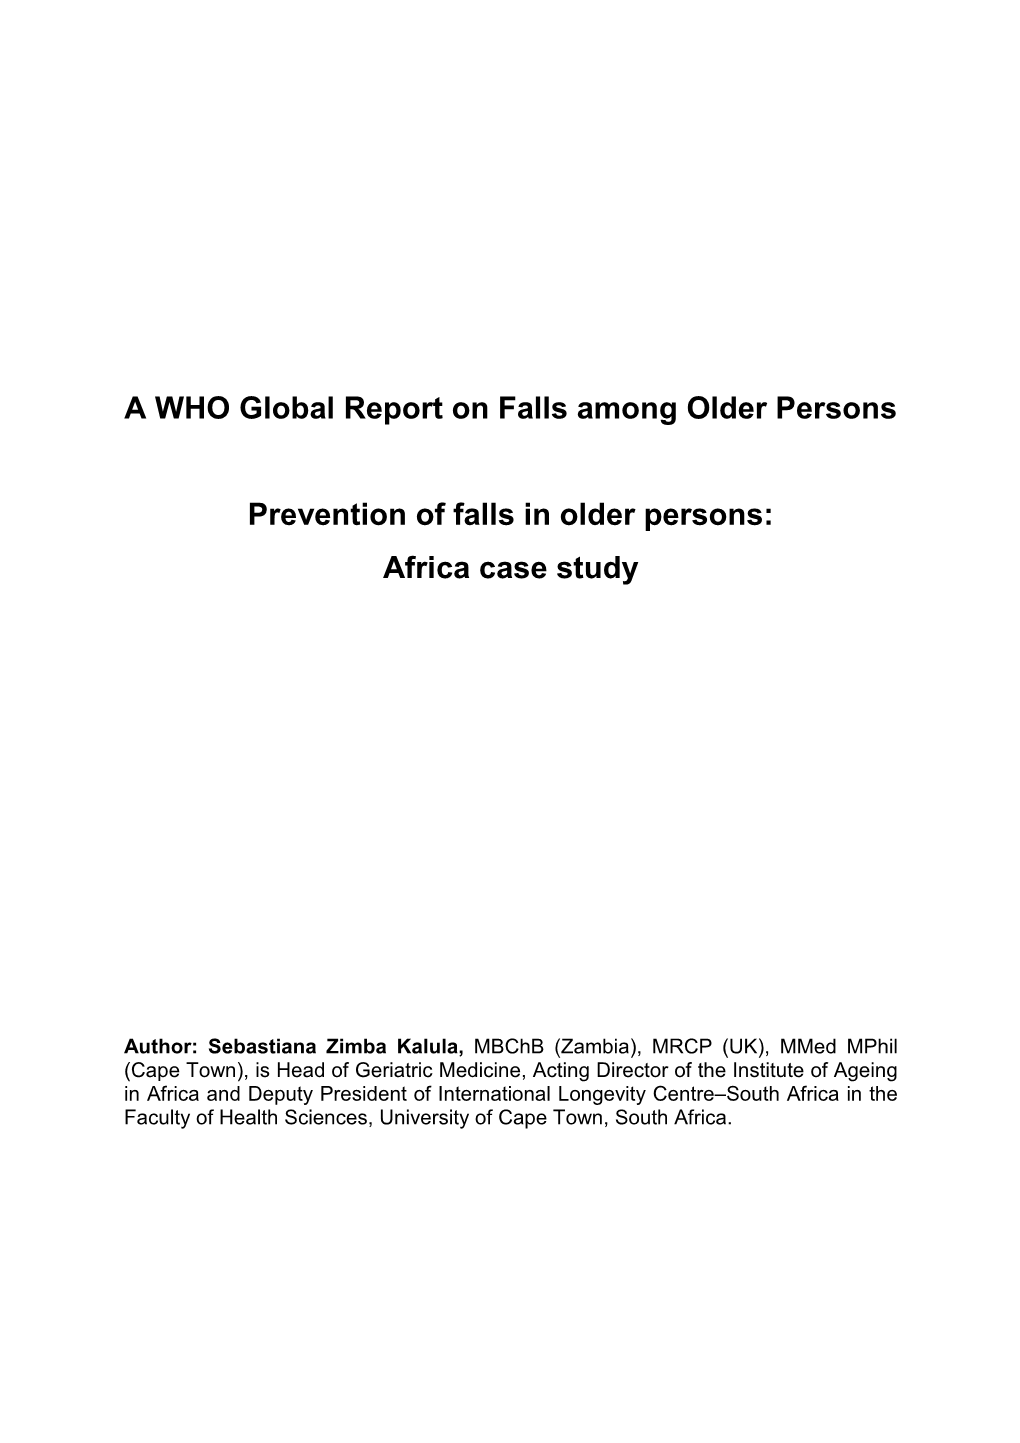 A WHO Global Report on Falls Among Older Persons